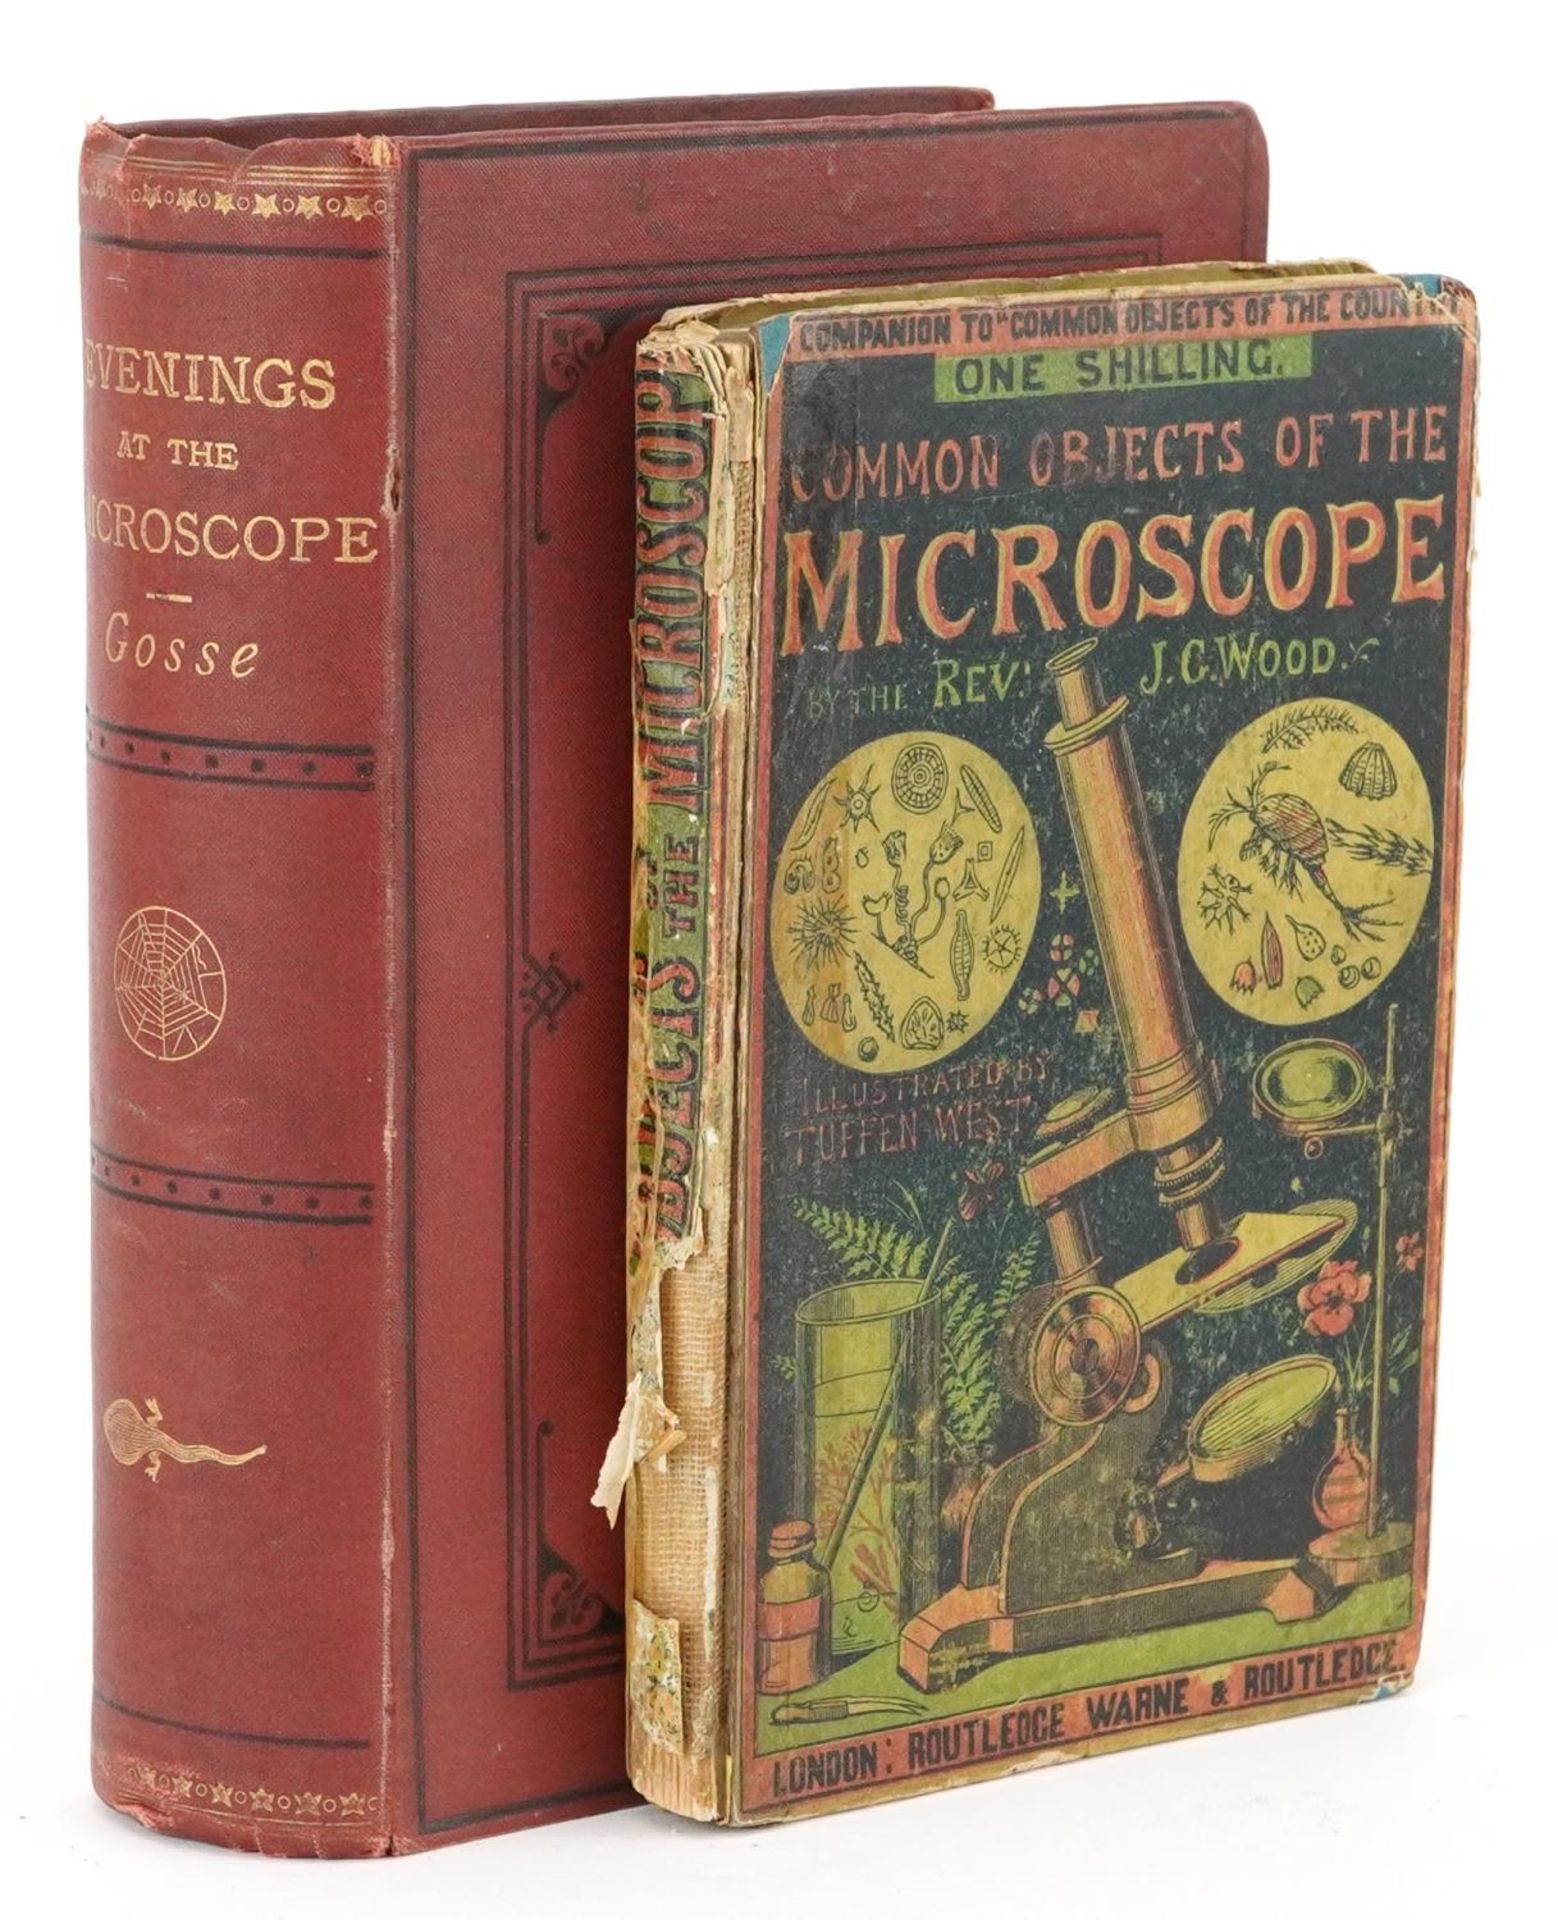 Two Scientific interest hardback books relating to microscopes comprising Common Objects of the